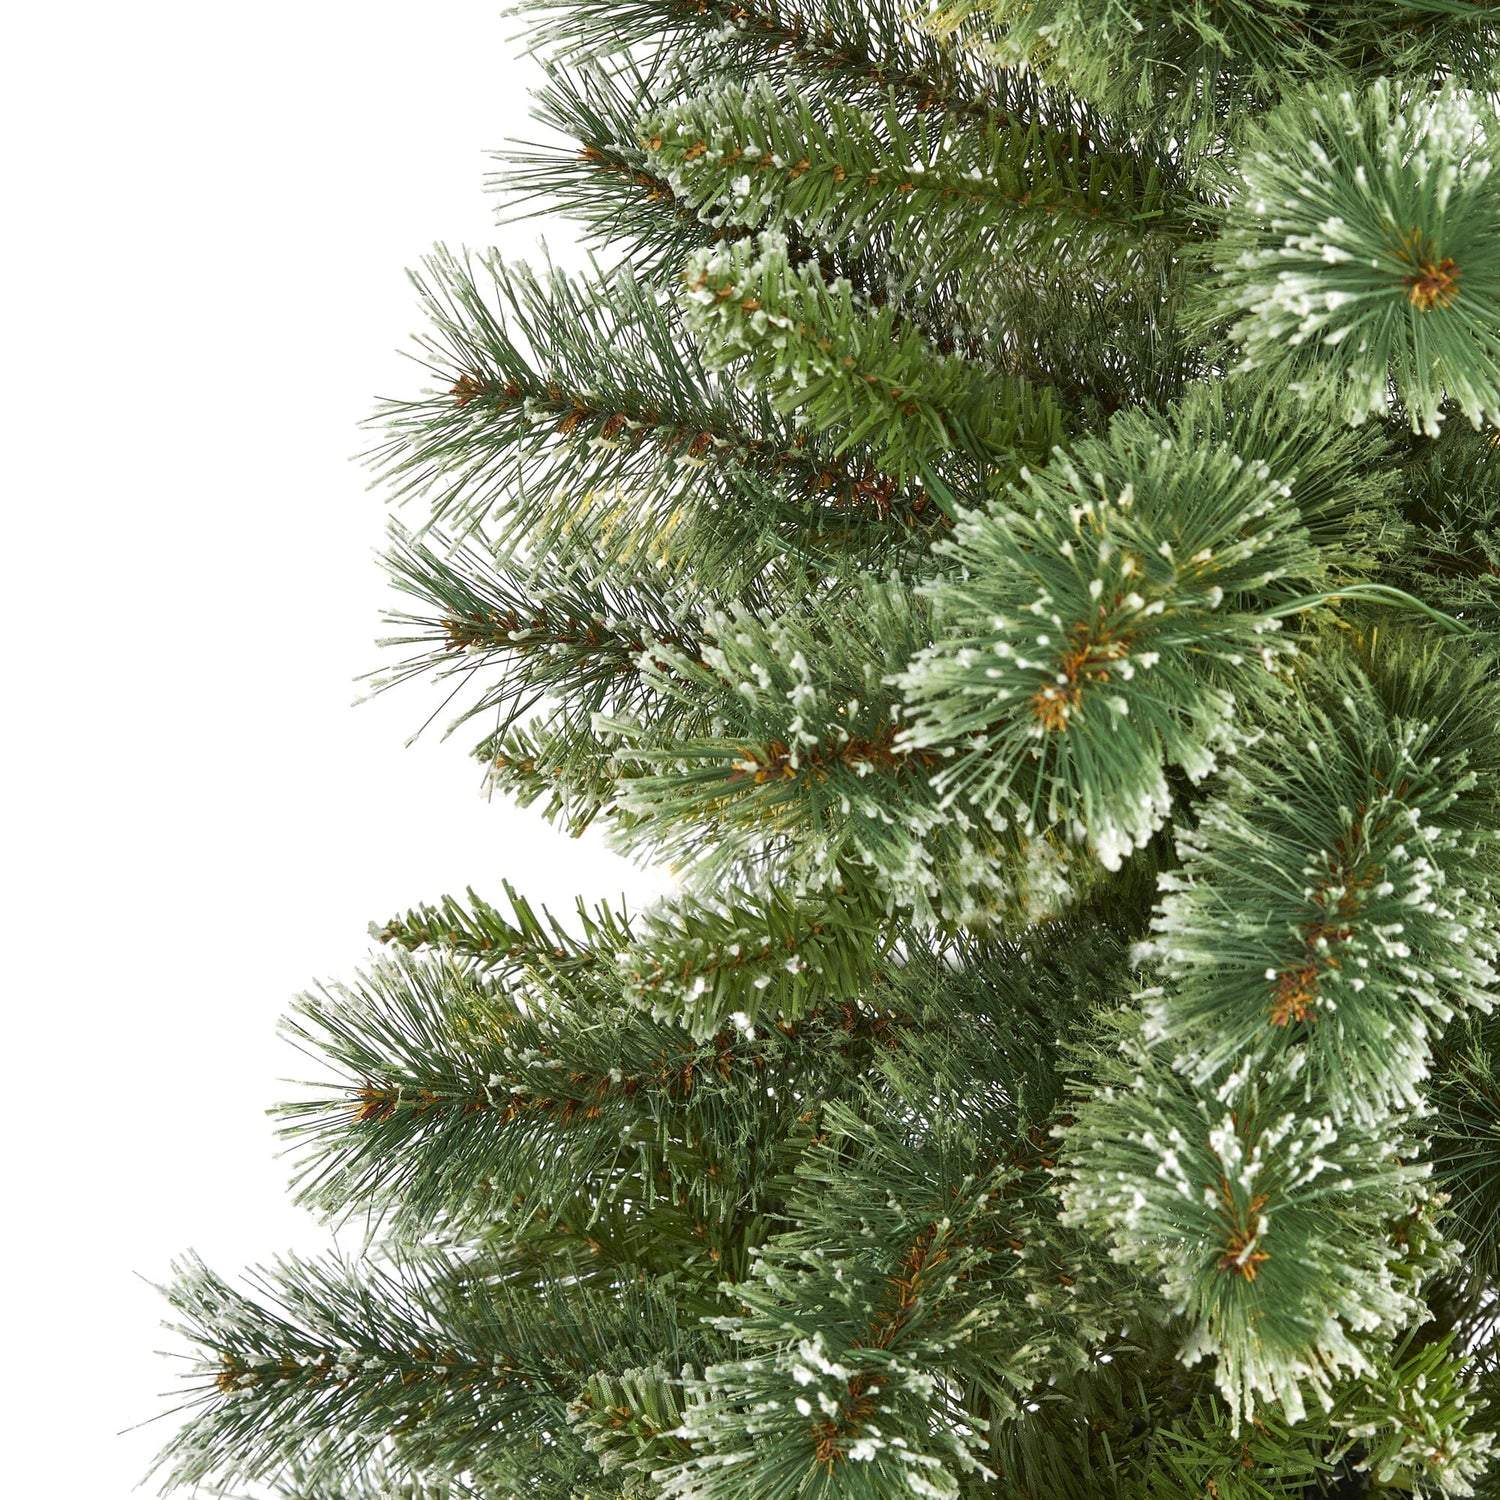 5’ Wisconsin Slim Snow Tip Pine Artificial Christmas Tree with 298 Bendable Branches